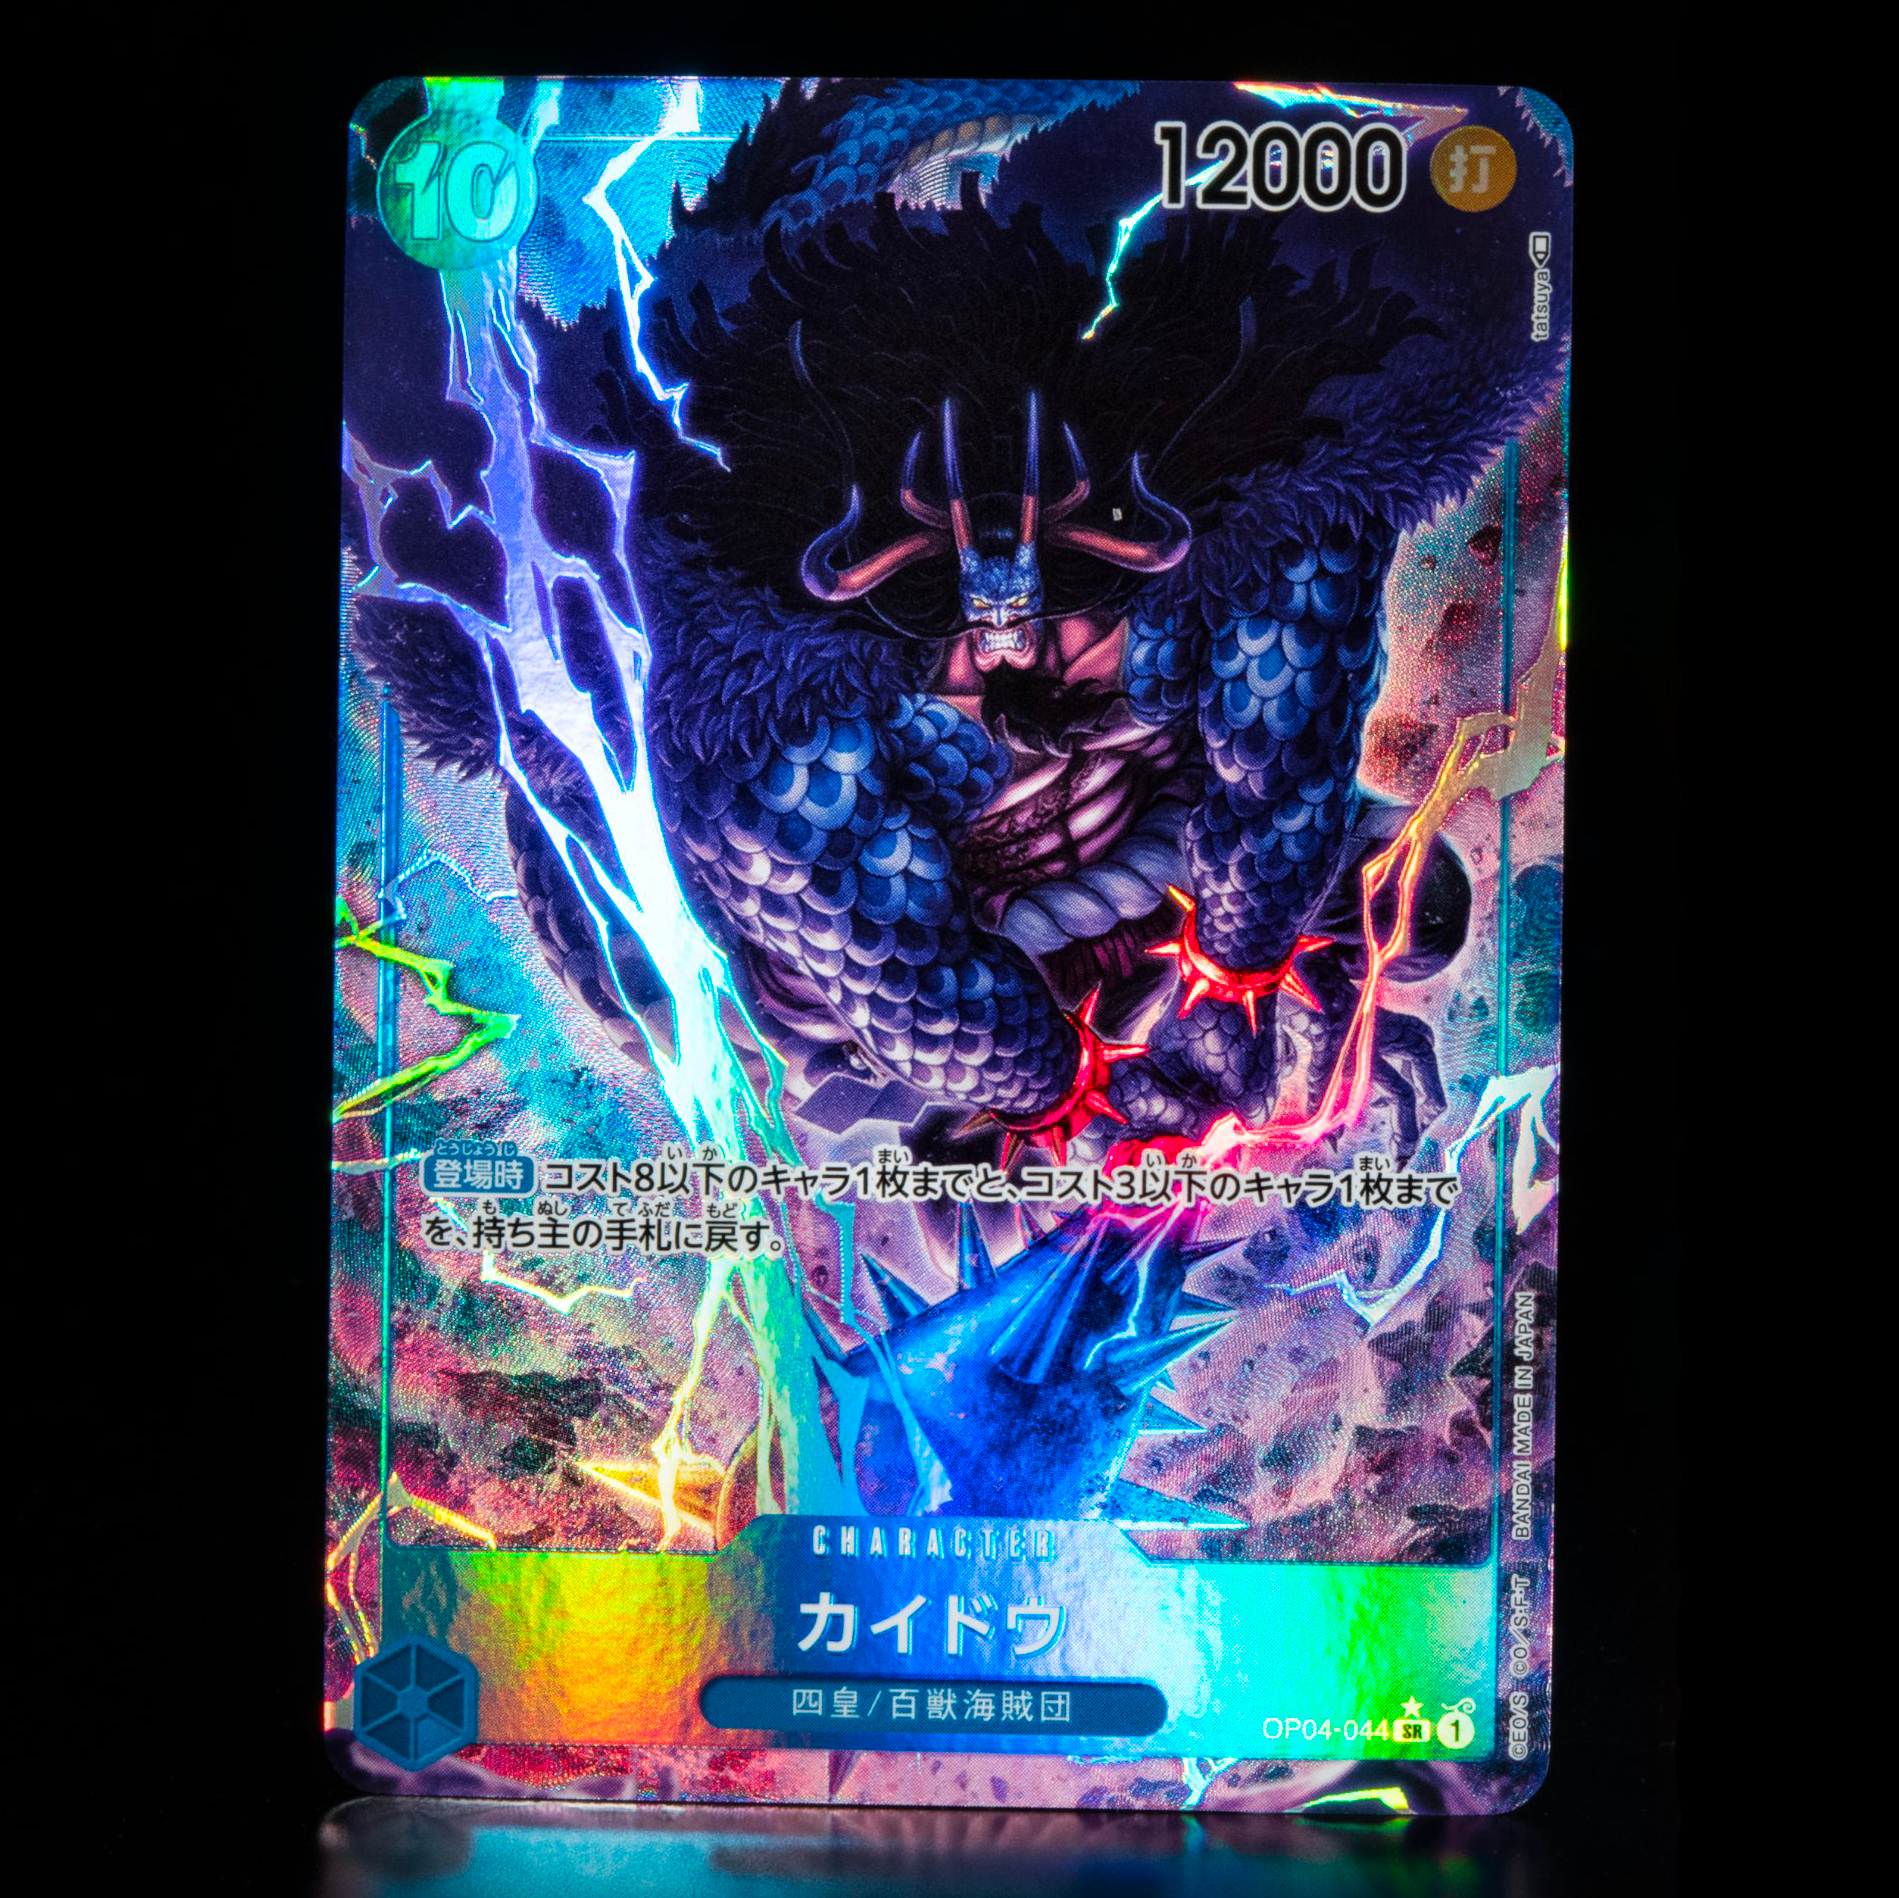 ONE PIECE CARD GAME ｢Kingdoms of Intrigue｣  ONE PIECE CARD GAME OP04-044 Super Rare Parallel card  Kaido